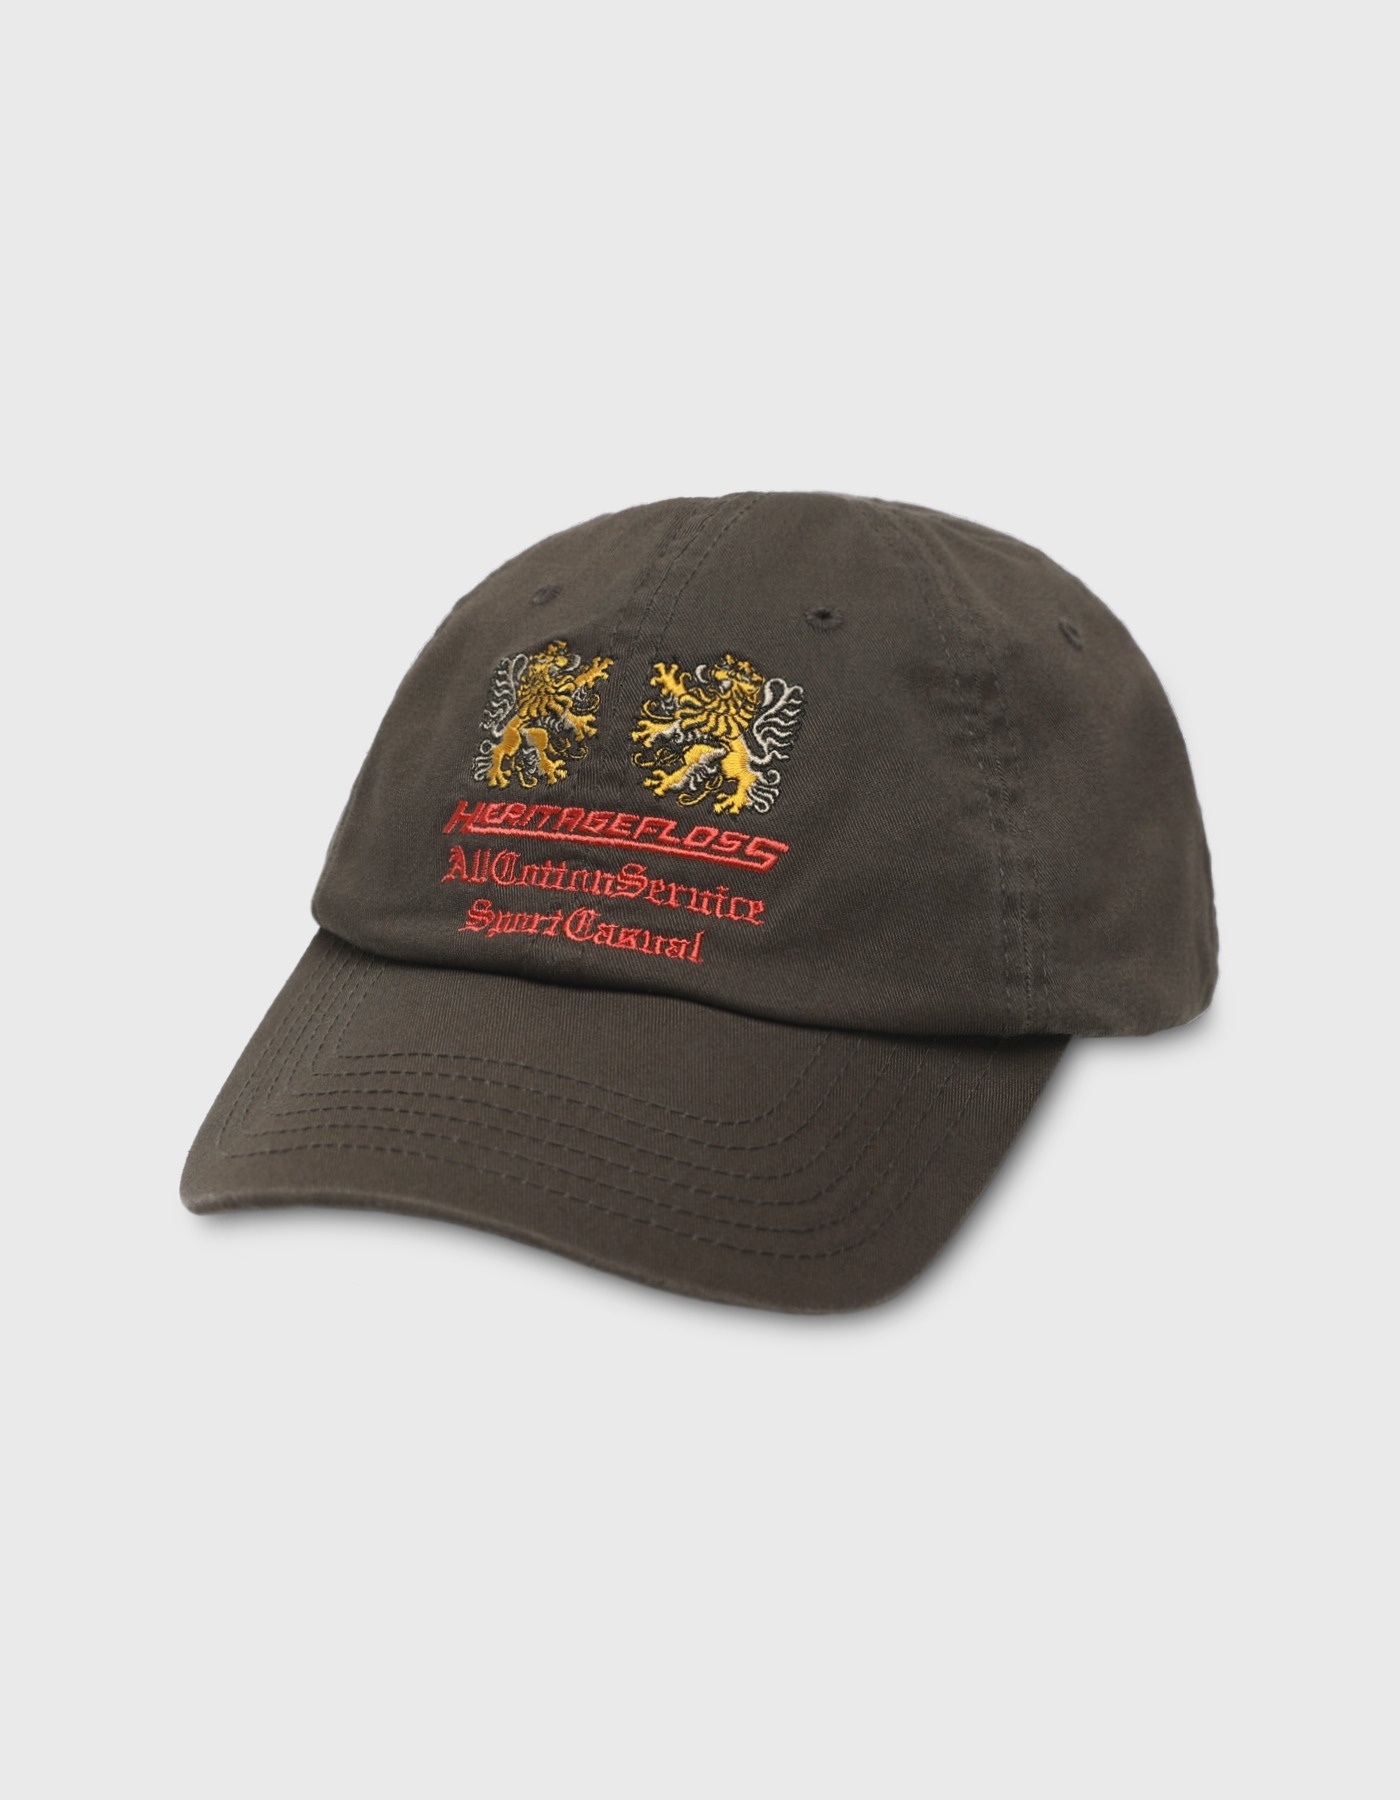 LIONS TWILL WASHED CAP / Brown